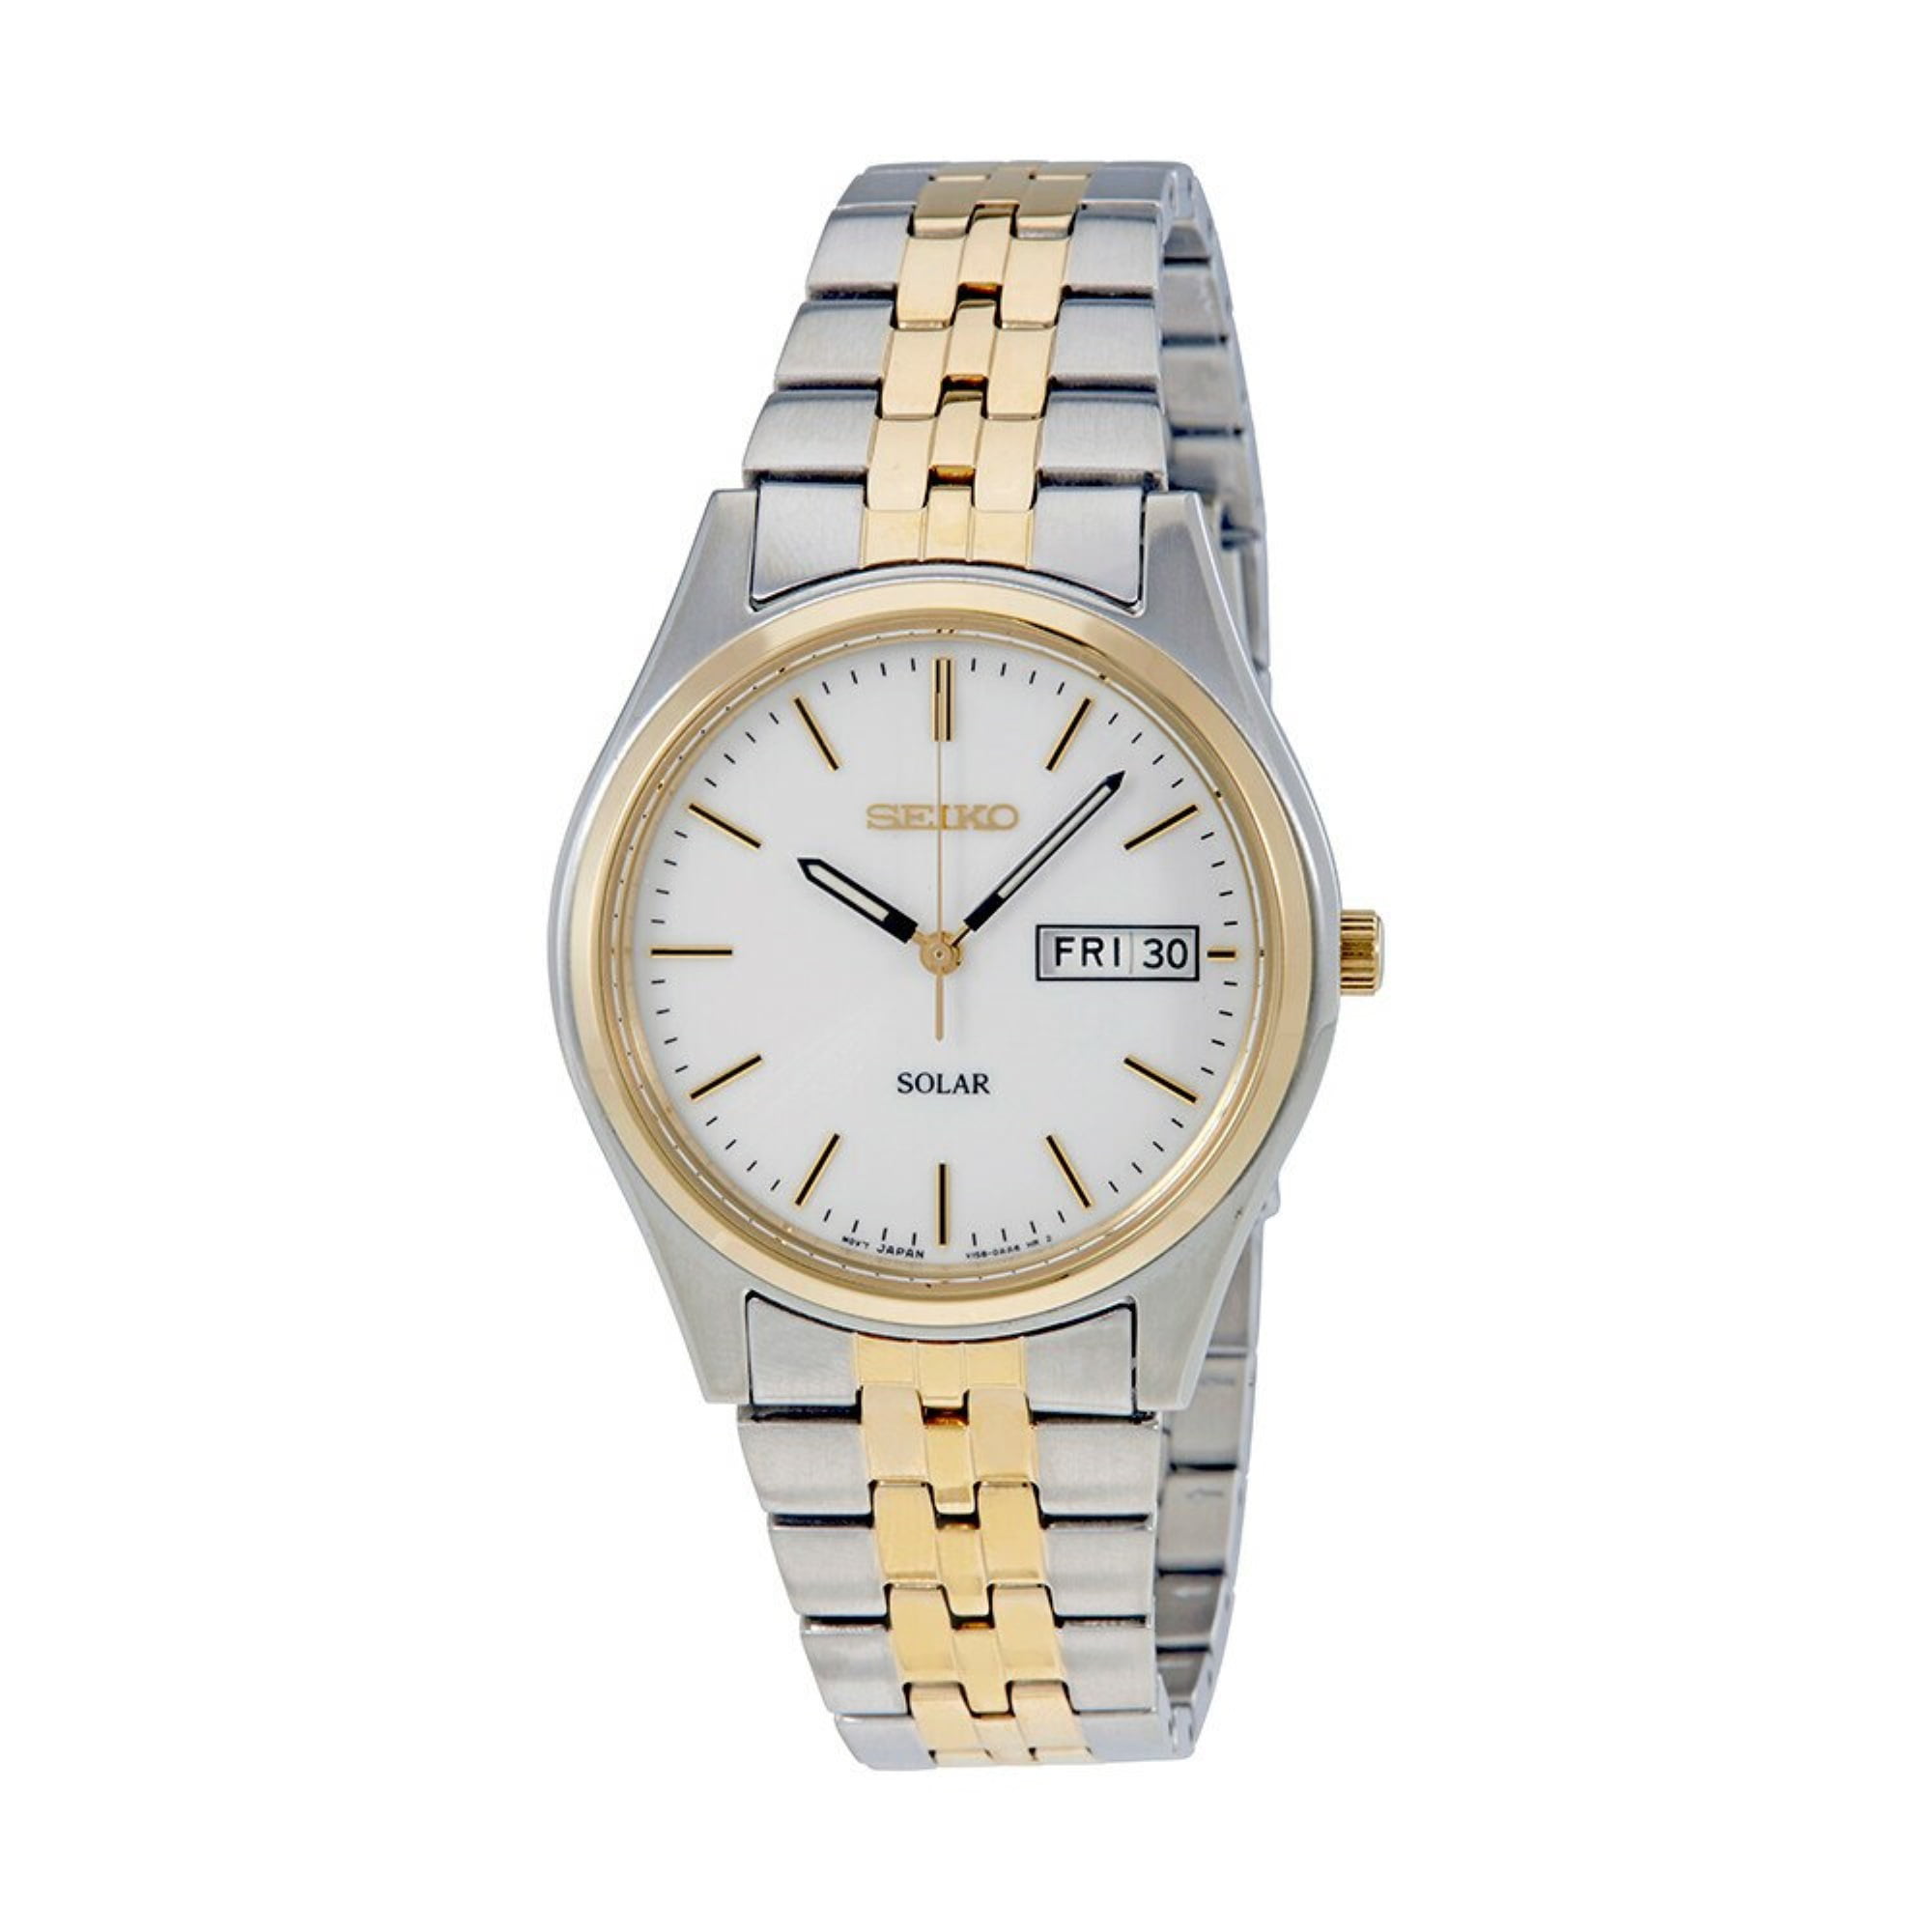 Seiko Men's SNE032 Gold Stainless-Steel Automatic Fashion Watch